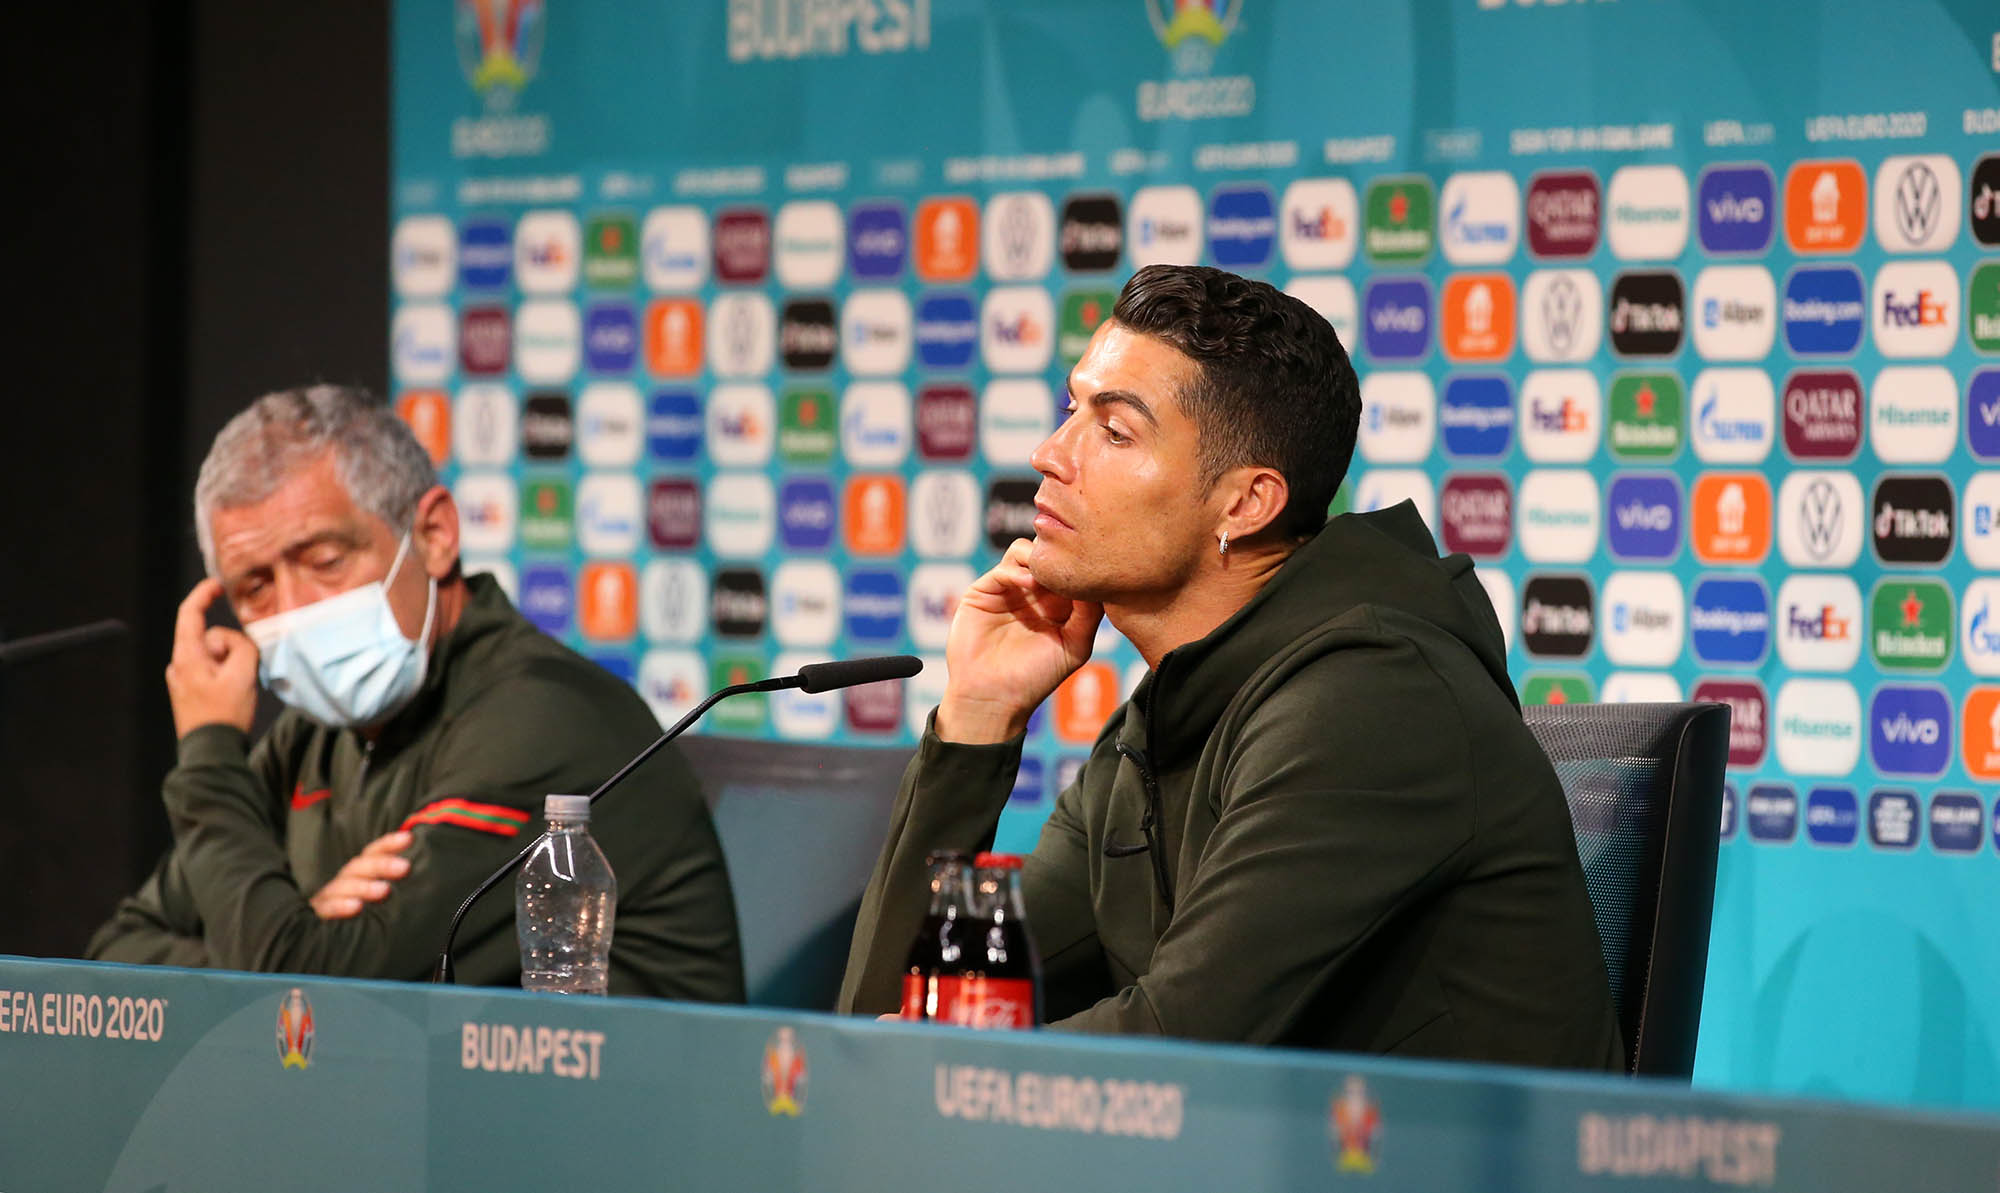 Cristiano Ronaldo speaks to the media ahead of the Euro 2020 Group F match between Hungary and Portugal&nbsp;in Budapest on June 14.&nbsp;